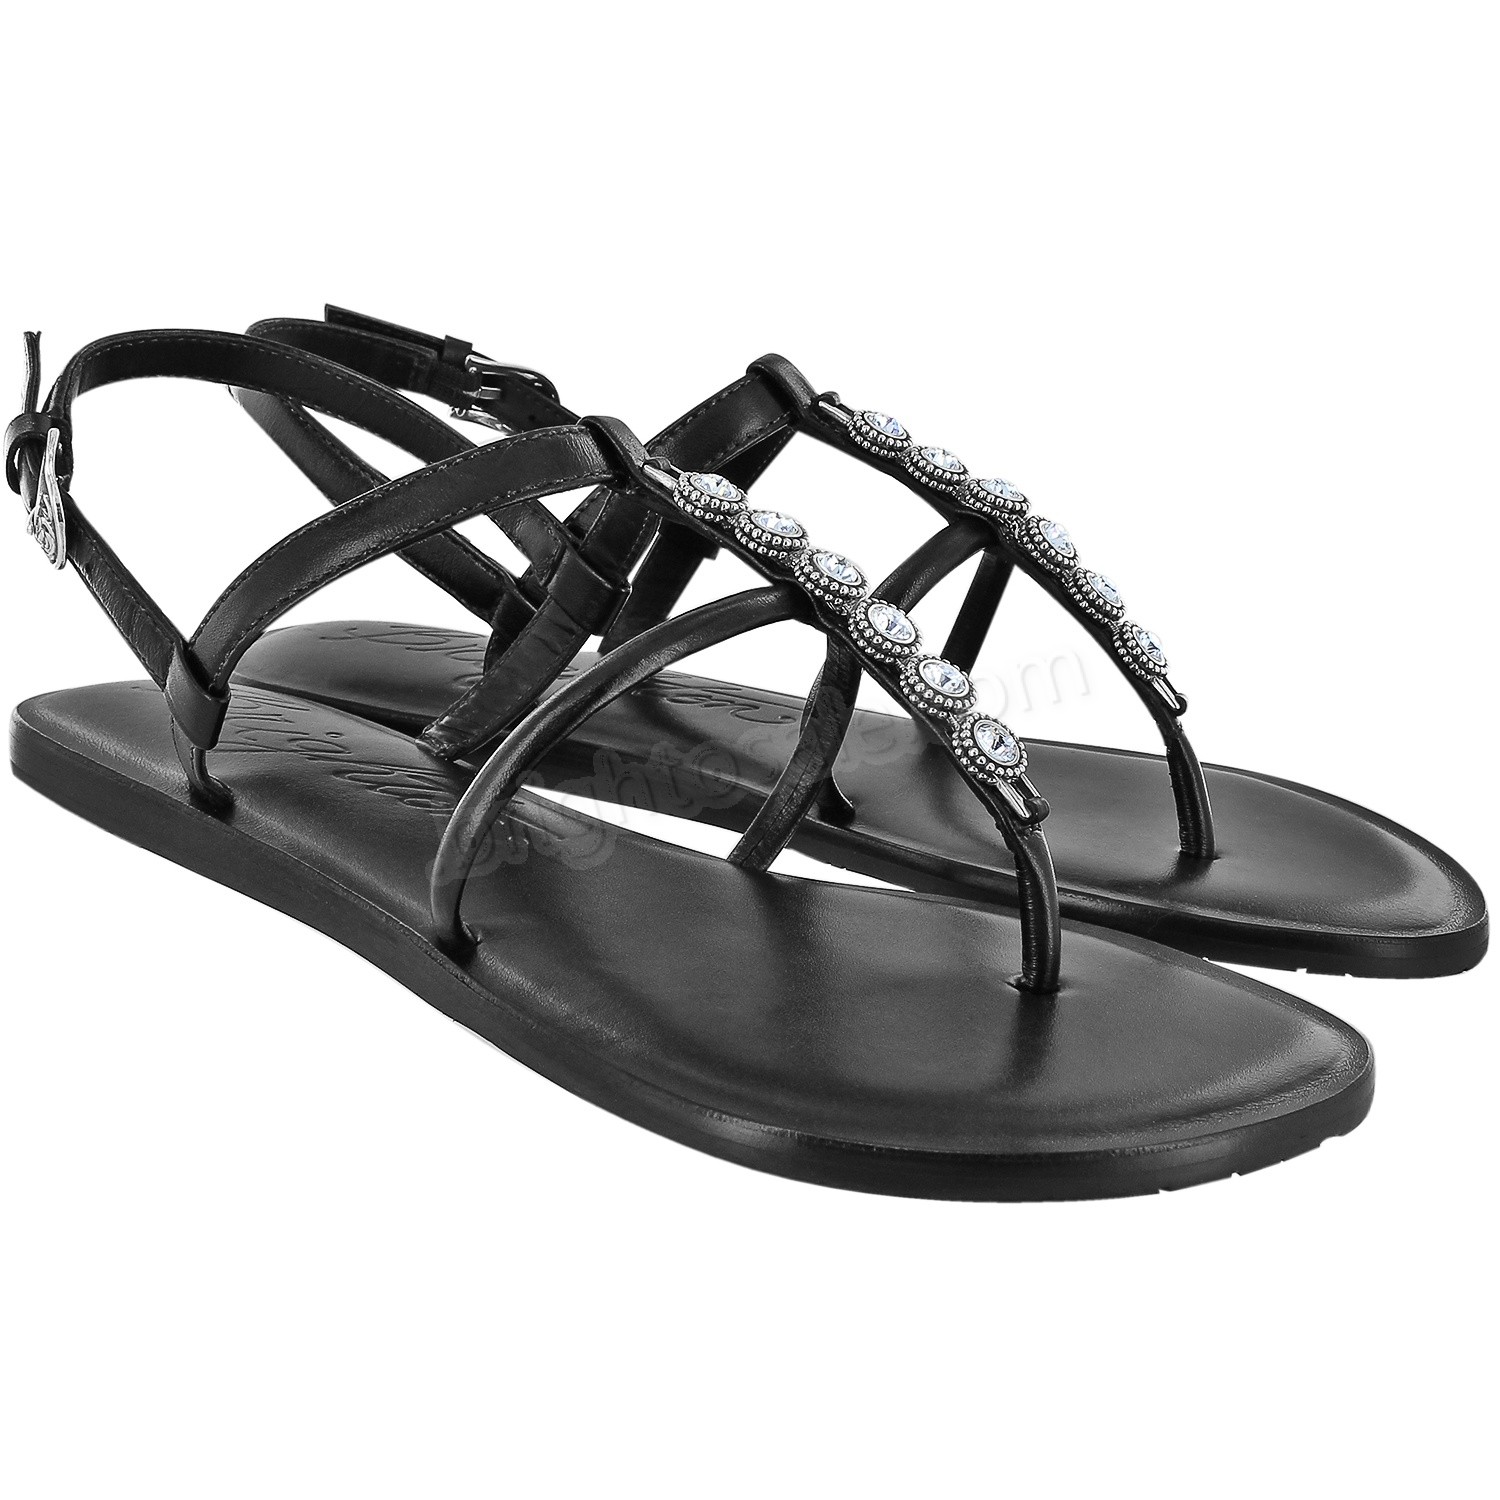 Brighton Collectibles & Online Discount Neve Sandals - Brighton Collectibles & Online Discount Neve Sandals